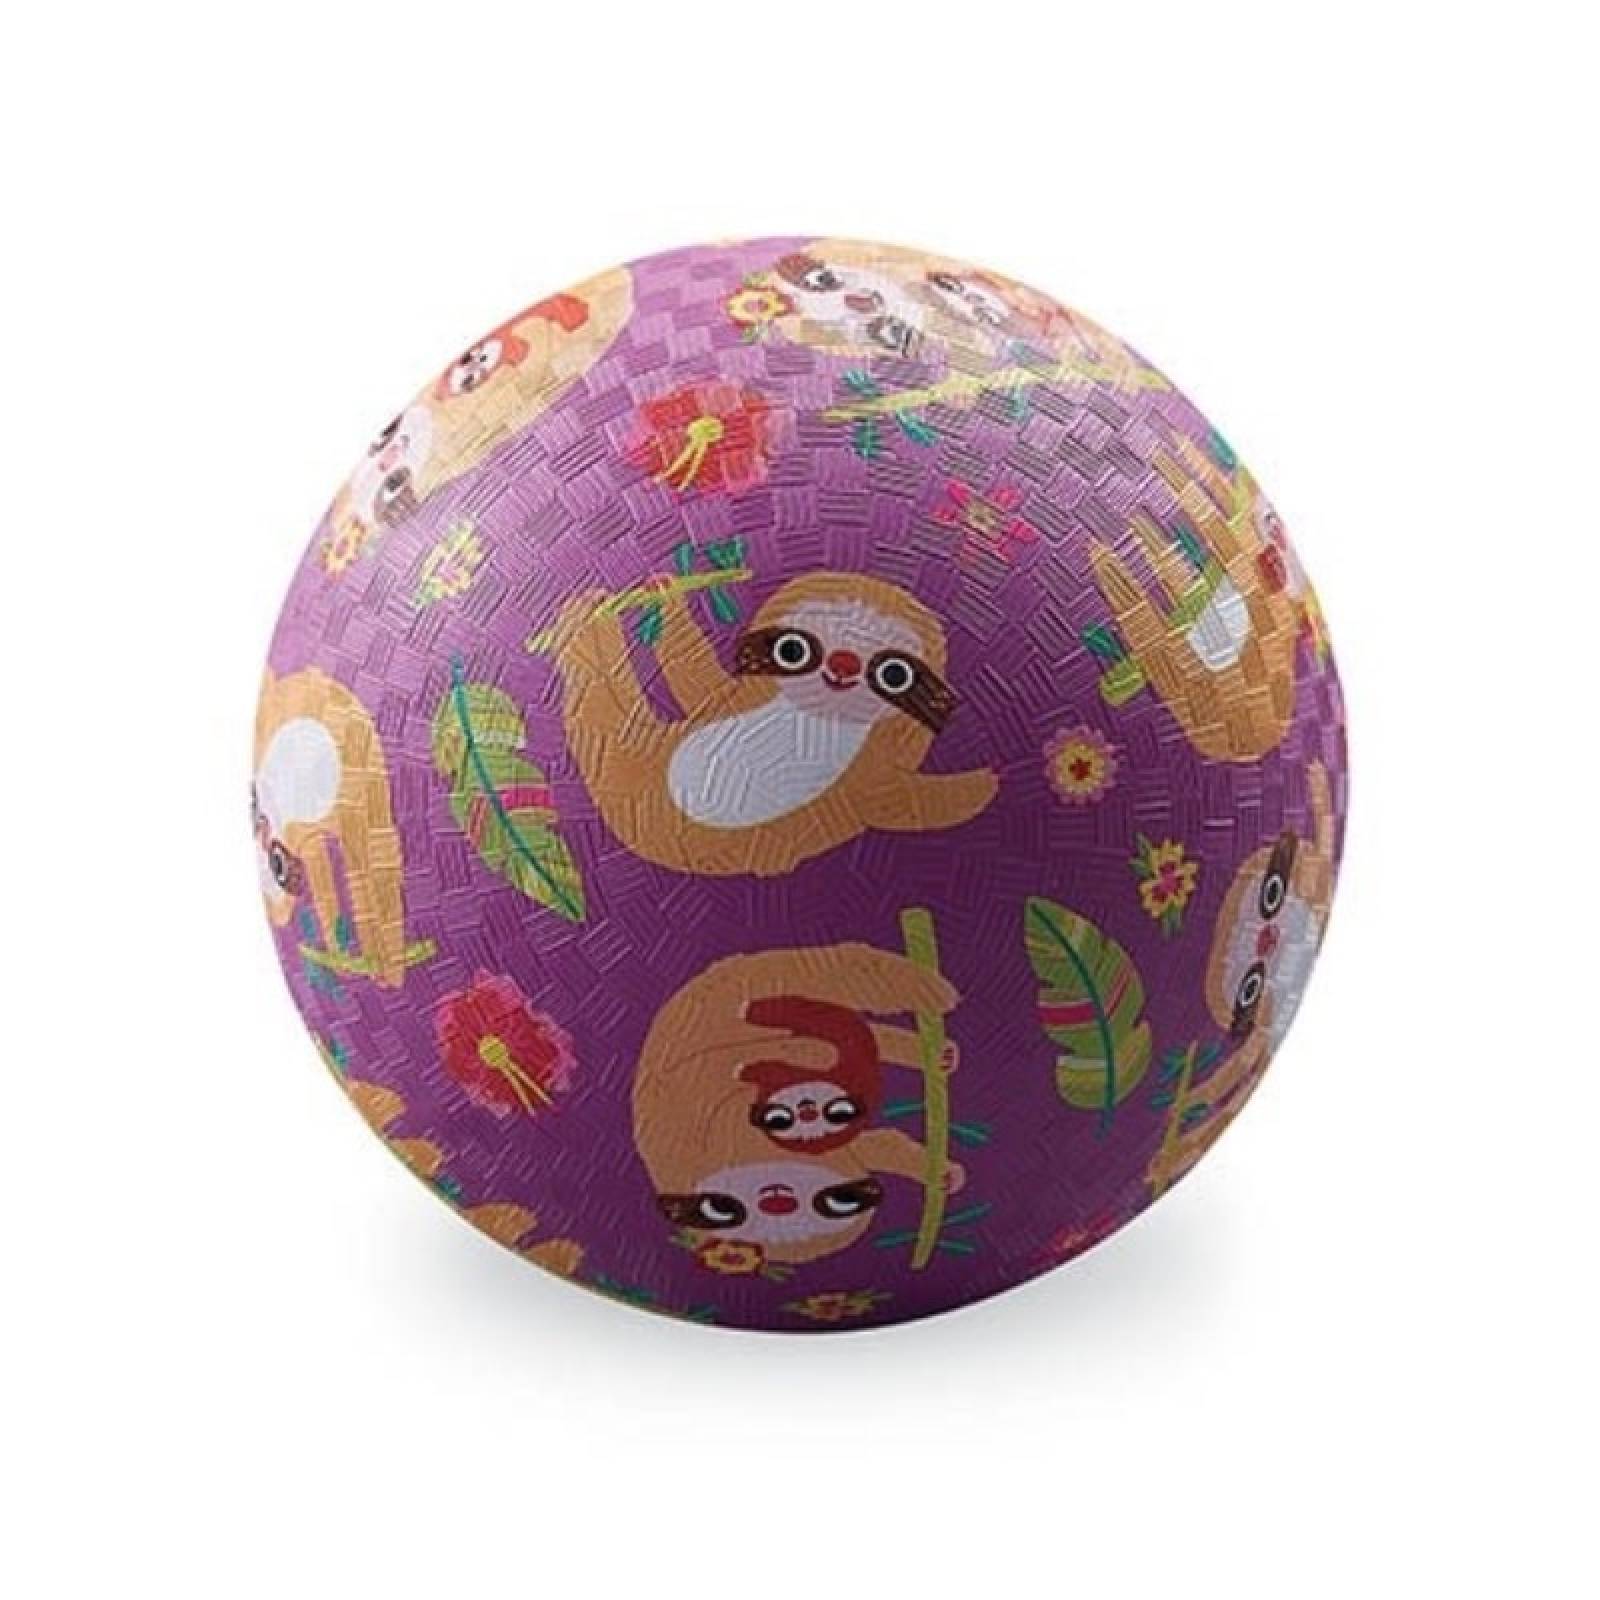 Sloth - Small Rubber Picture Ball 13cm